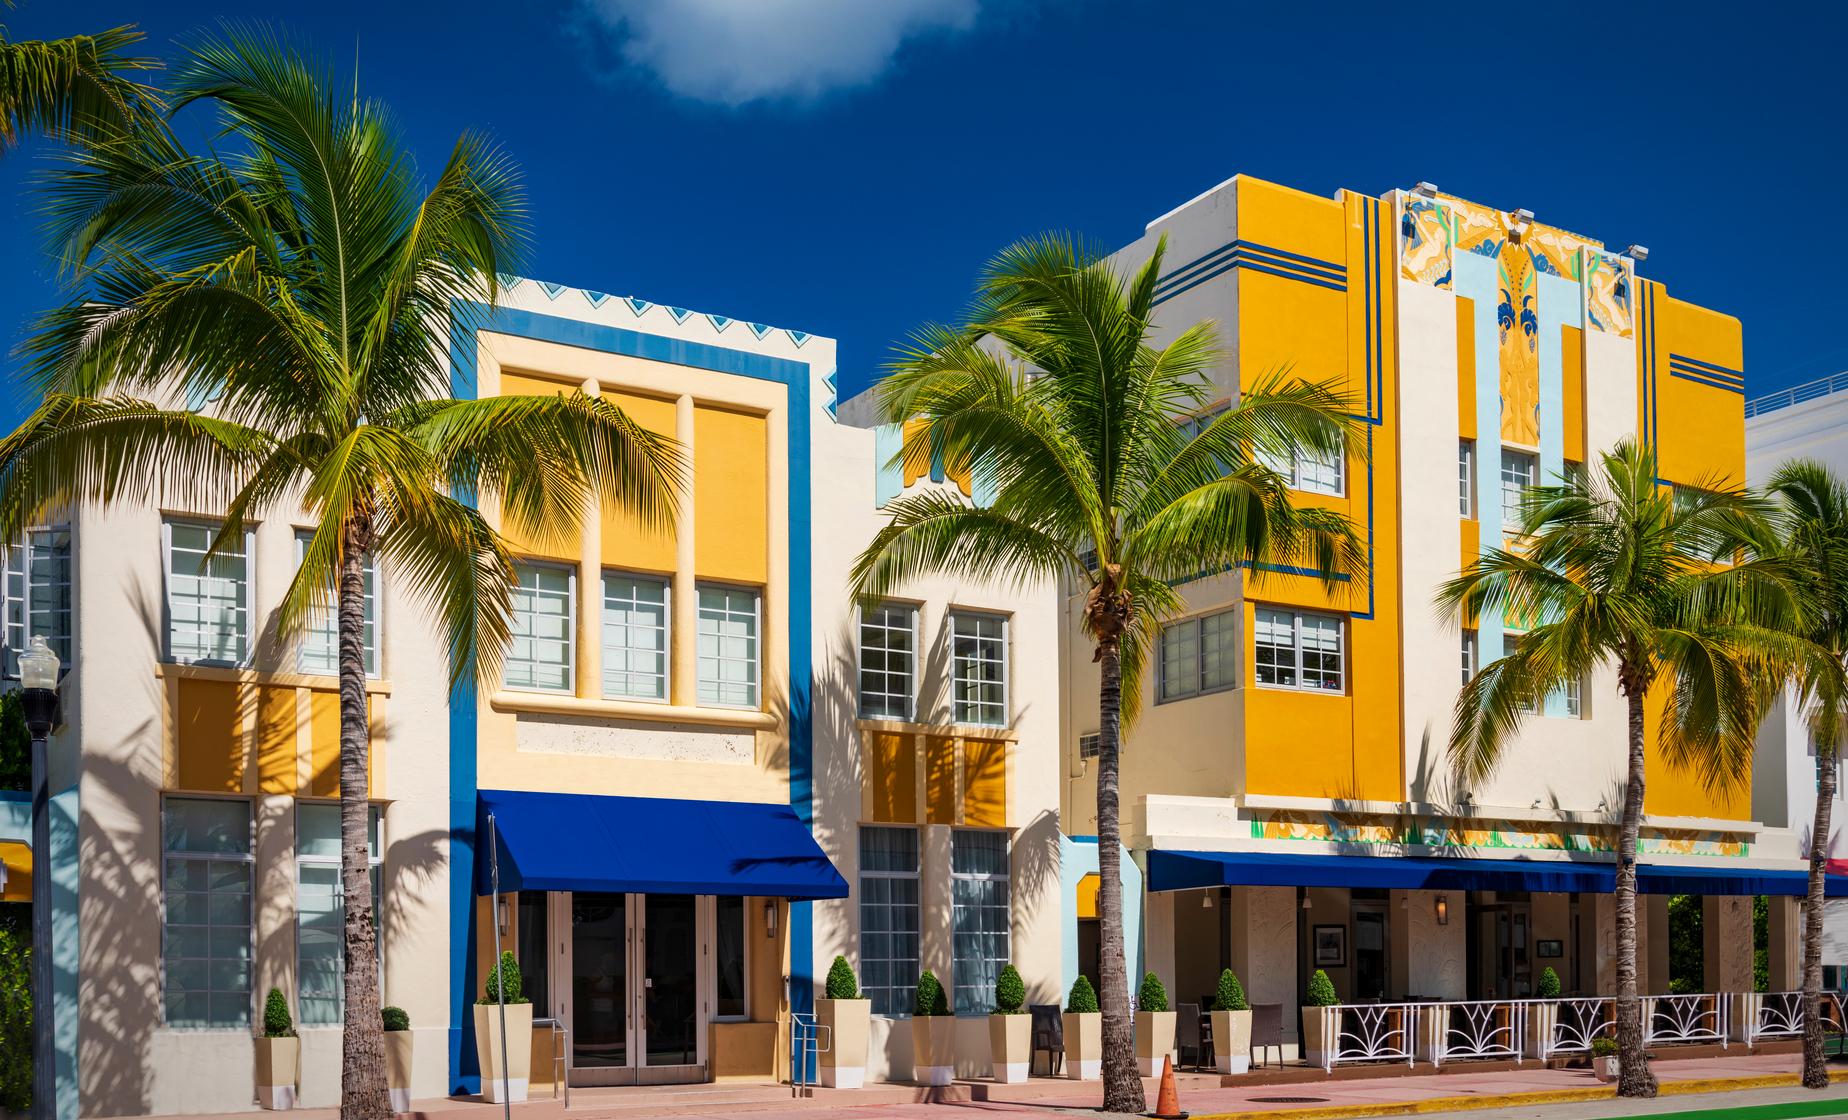 The 10 Best Miami Shore Excursions & Tours in Florida for Caribbean Cruises